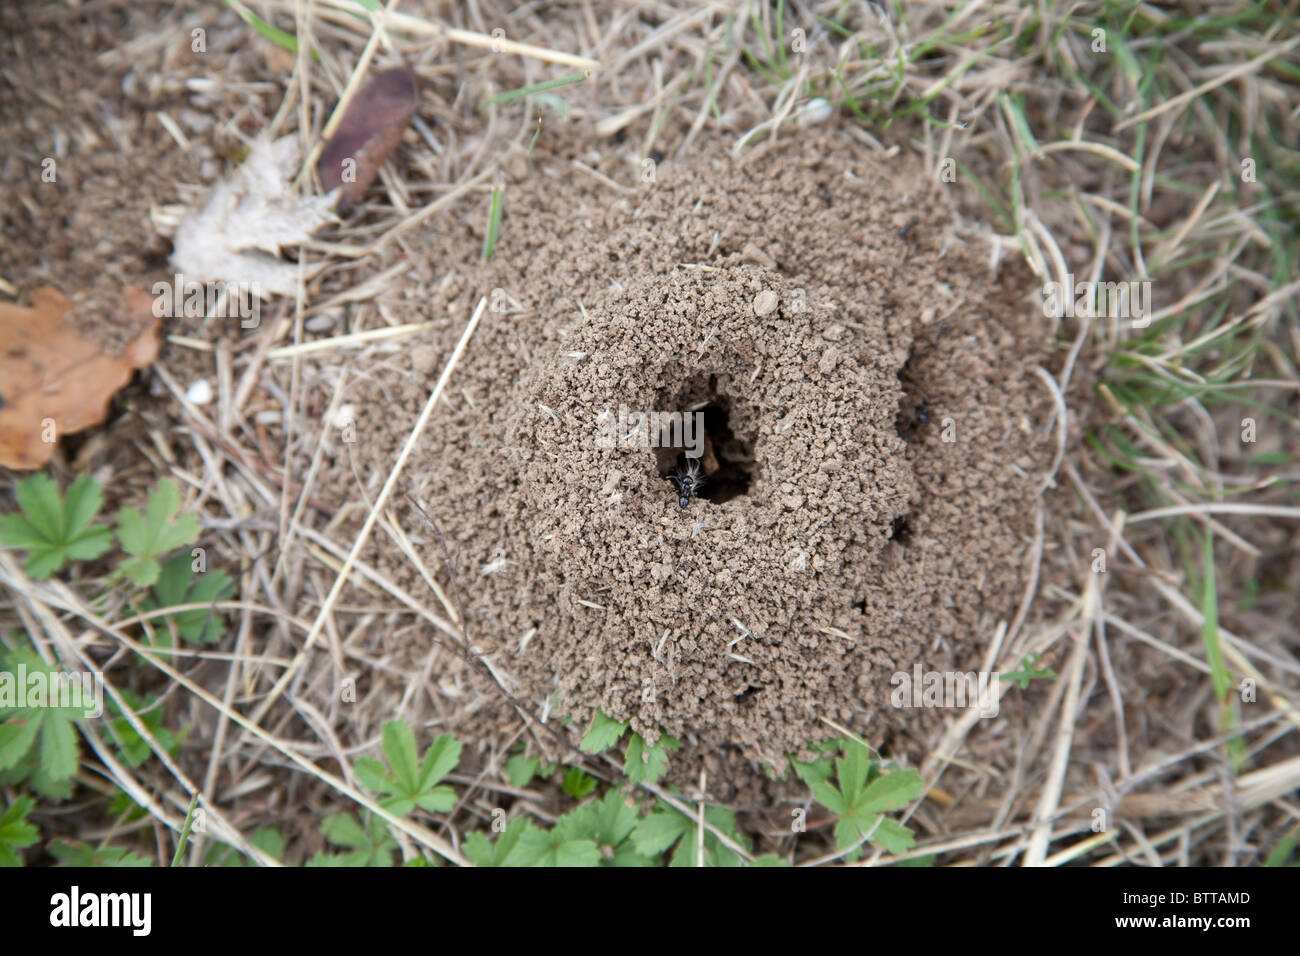 Ants scurrying around an ants nest in the countryside outside Valencia, Spain Stock Photo